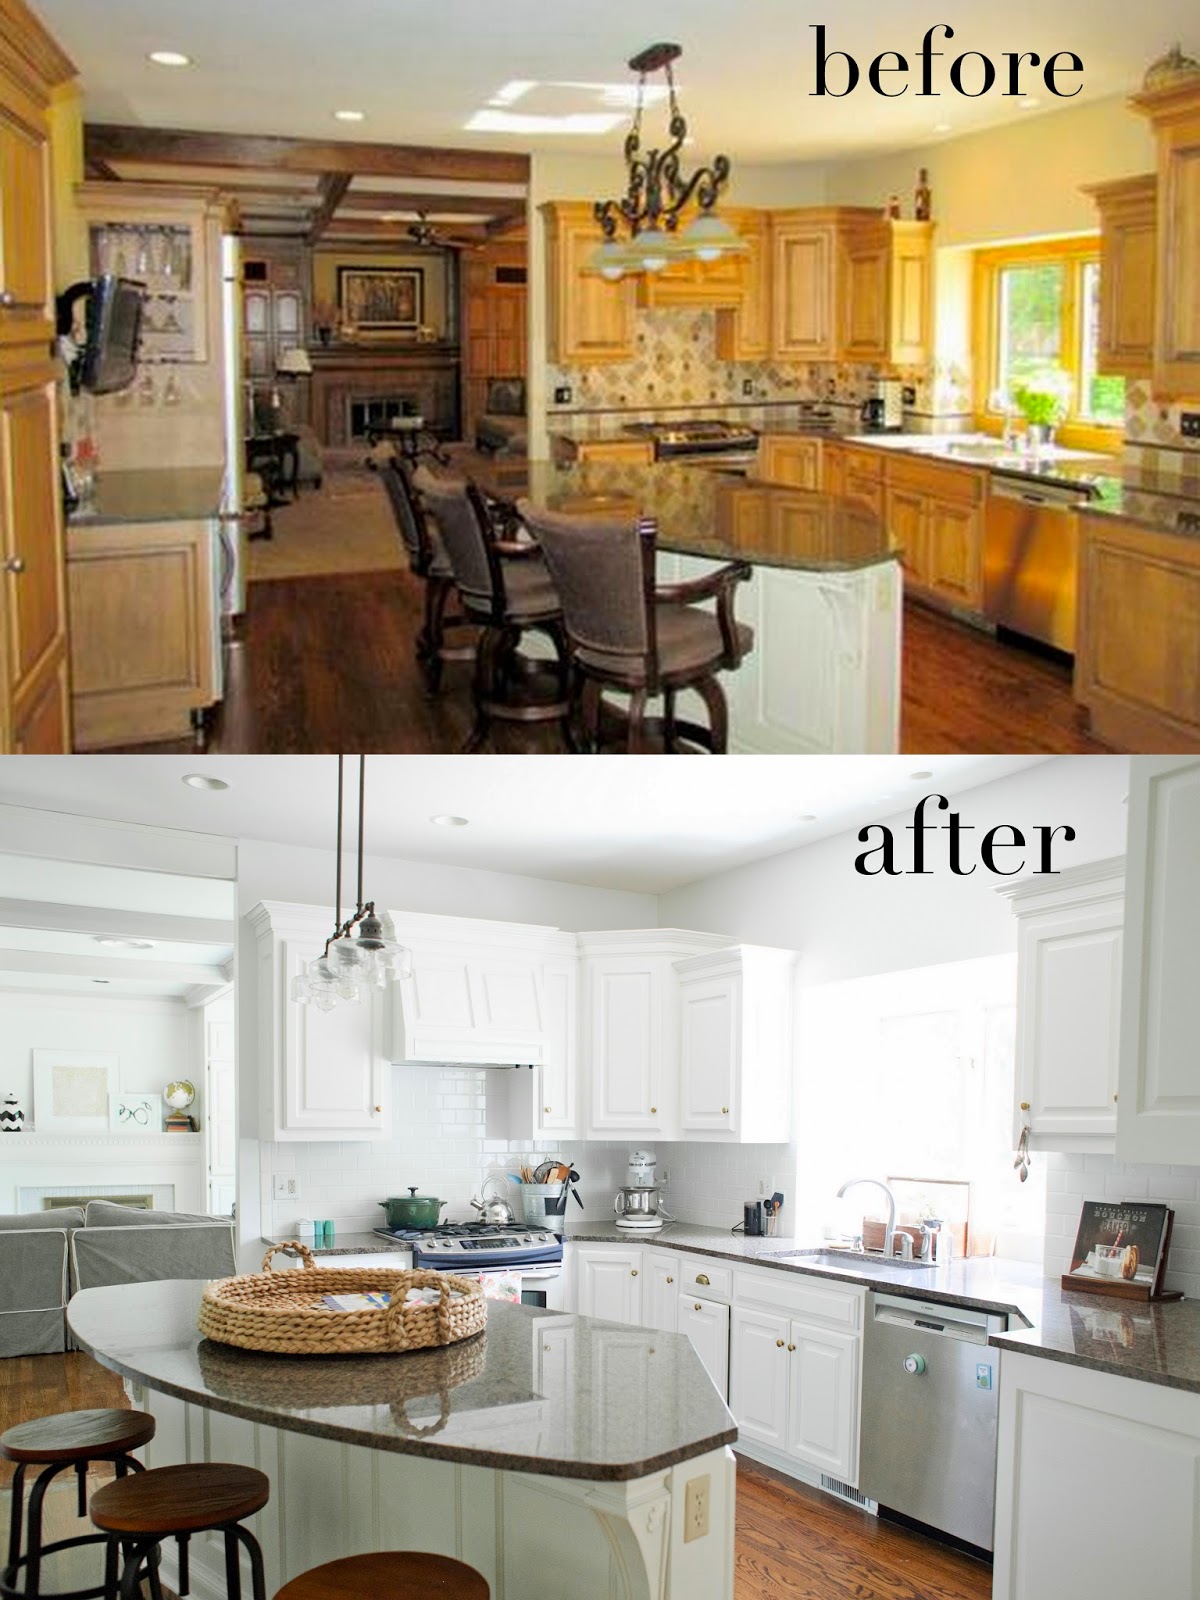 from the nato's: yet, another kitchen redo. because WHITE KITCHENS!